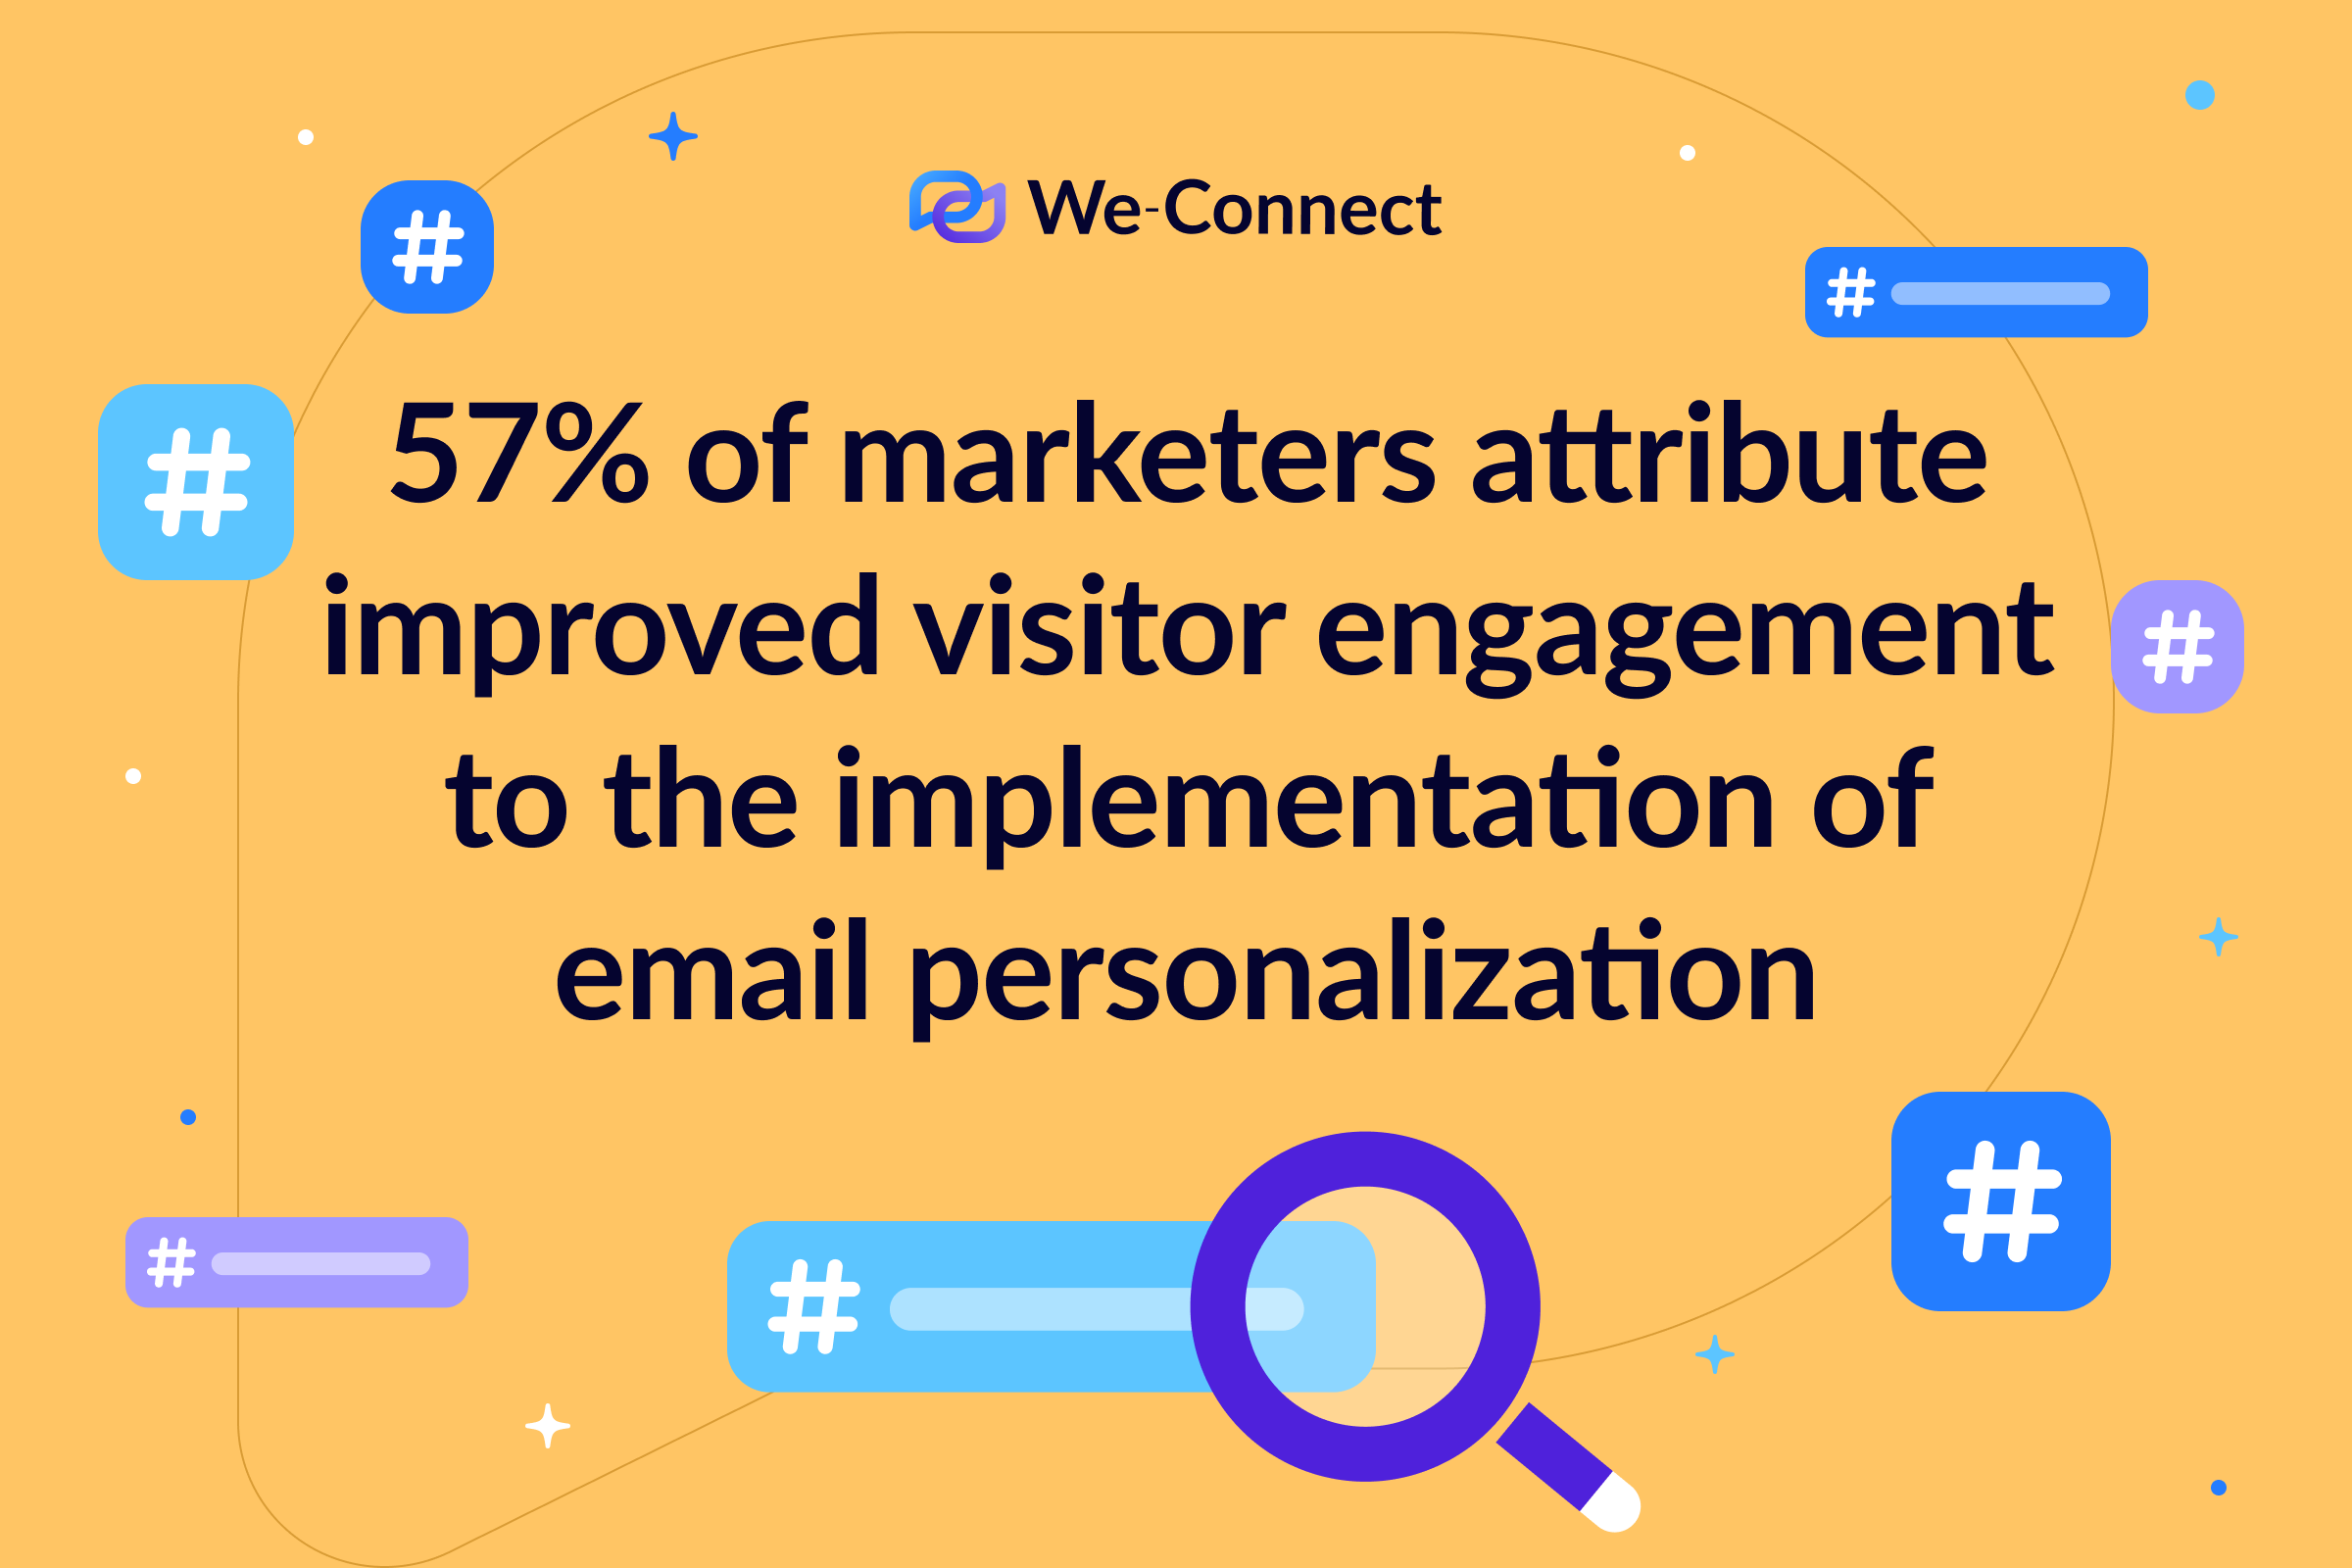 57% of marketers attribute improved visitor engagement to the implementation of email personalization